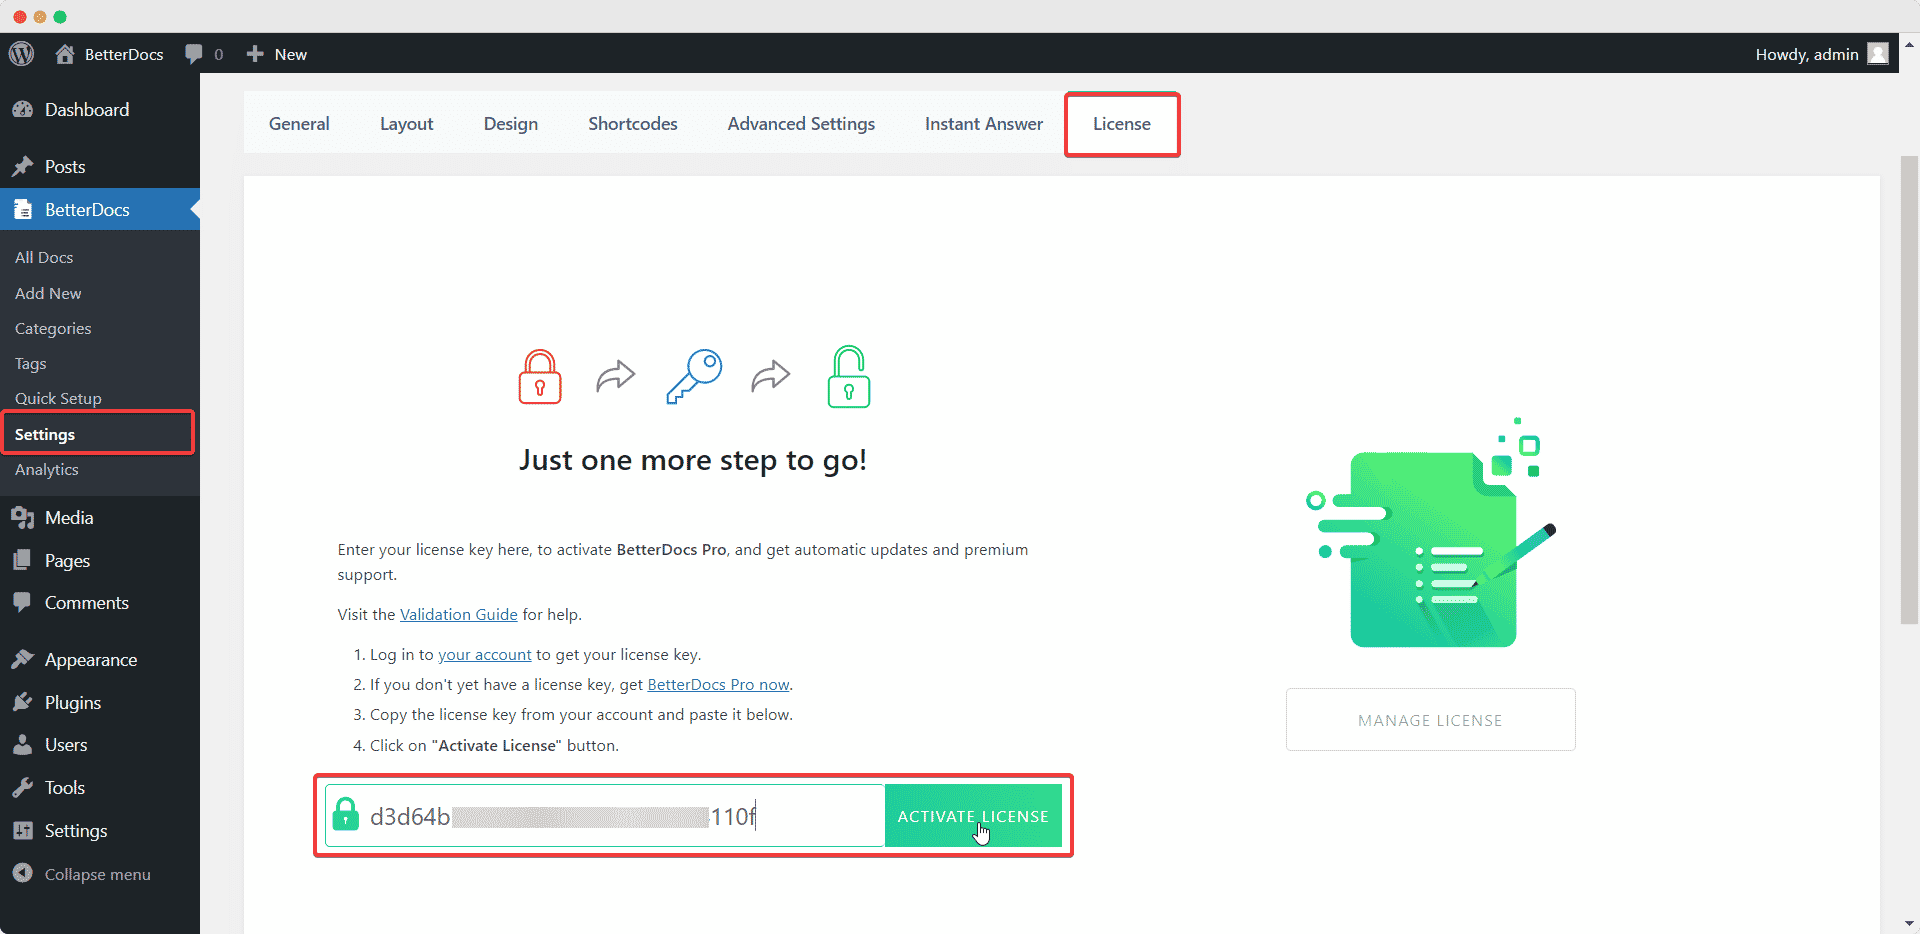 How to Activate BetterDocs License Key?